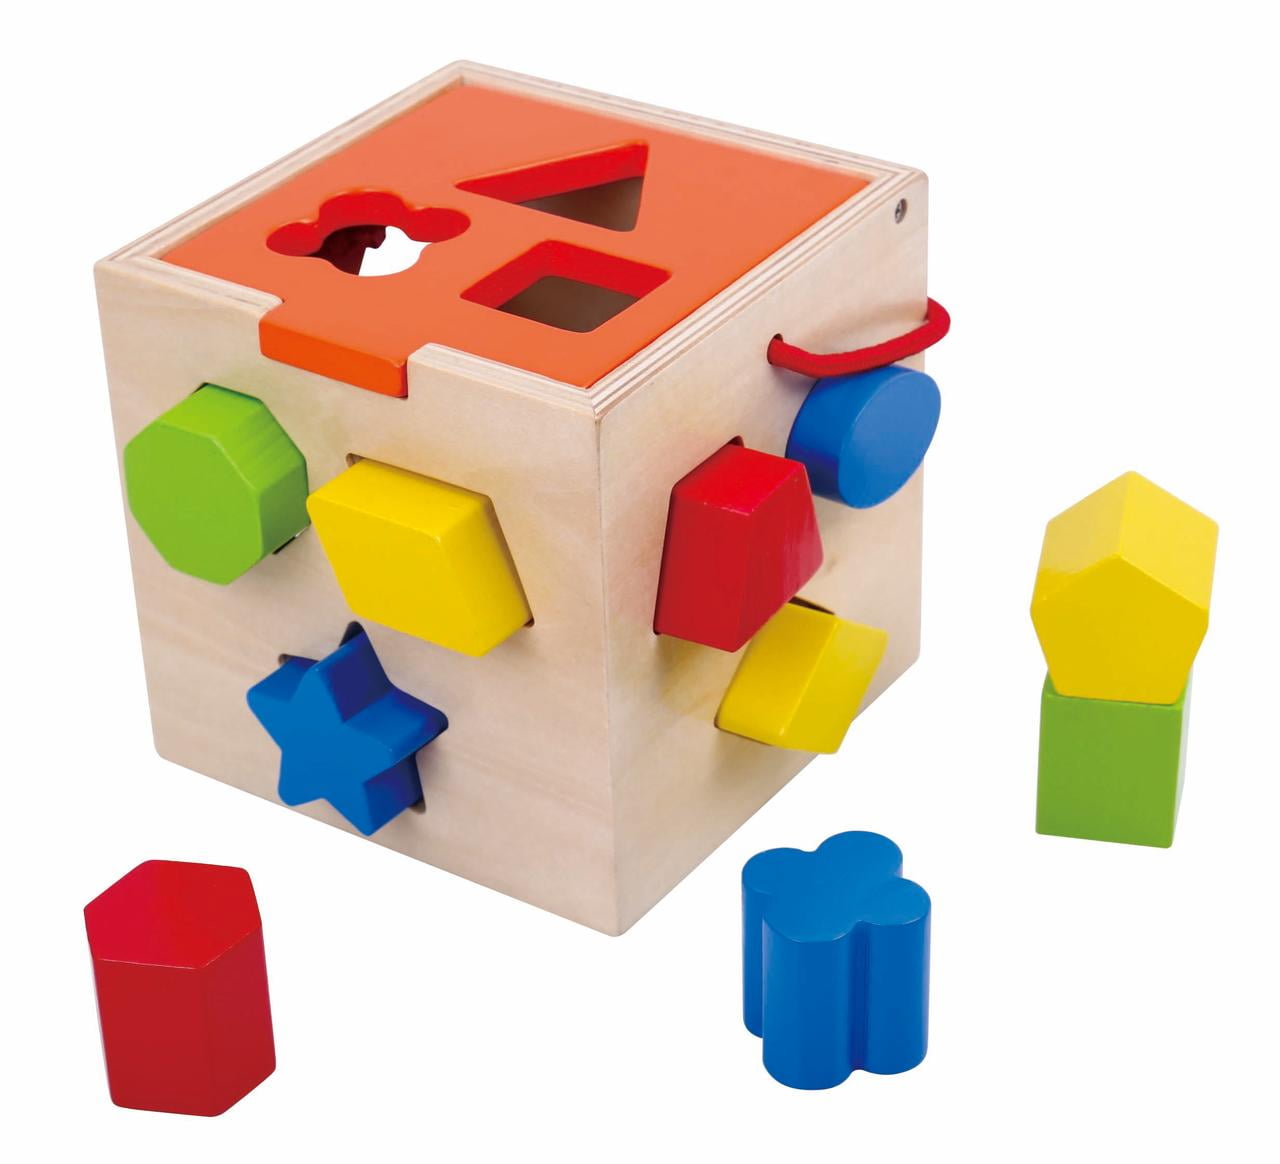 Shape Sorting Cube Classic Wooden Developmental Toy Easy-to-Grip Sturdy 12-Piece 